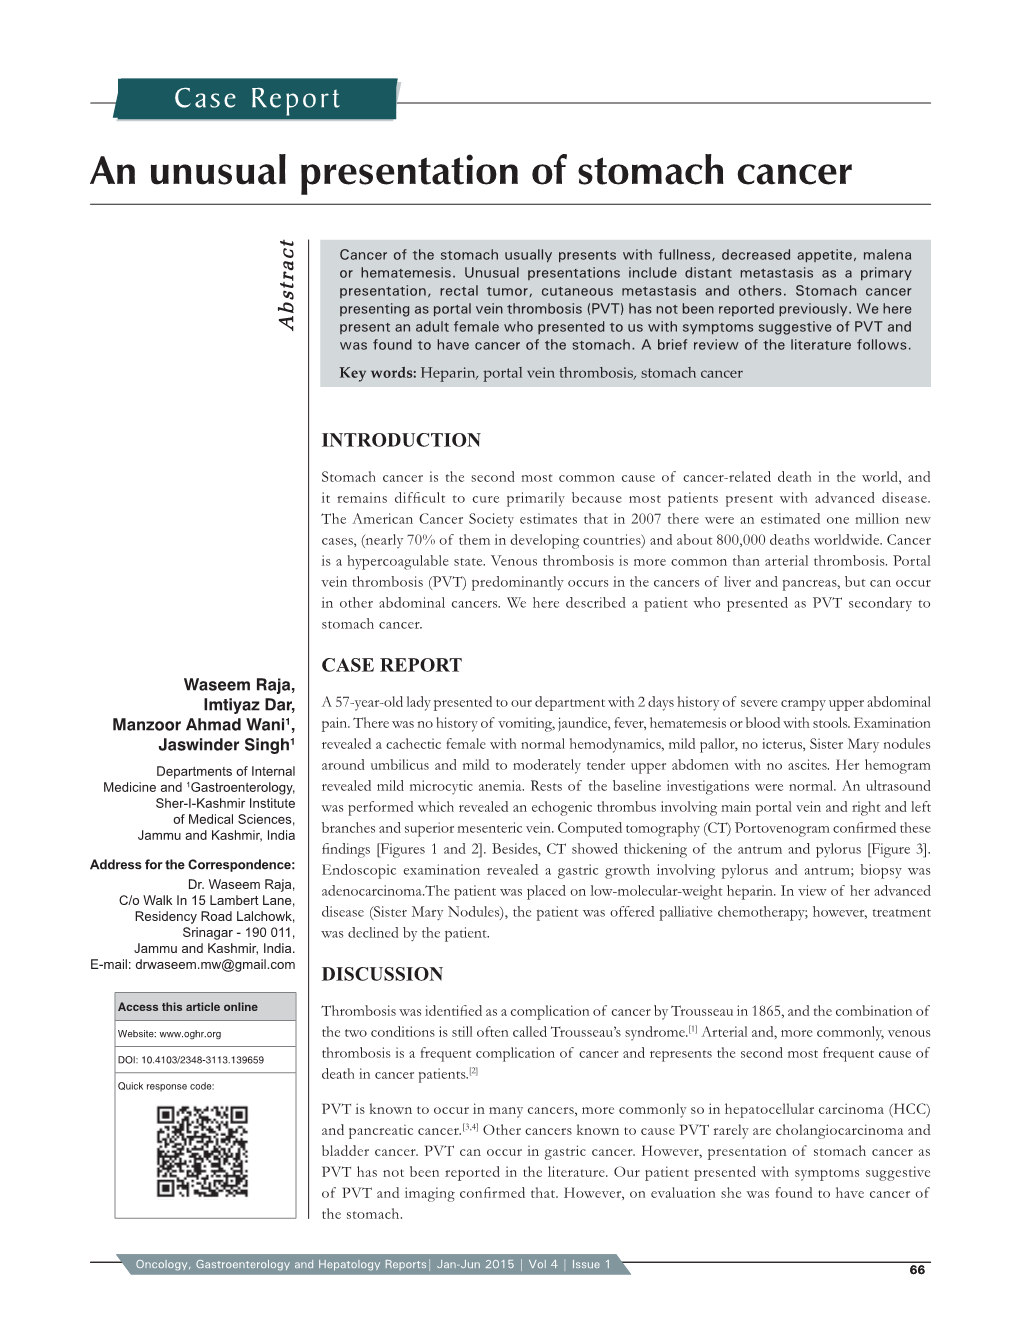 An Unusual Presentation of Stomach Cancer